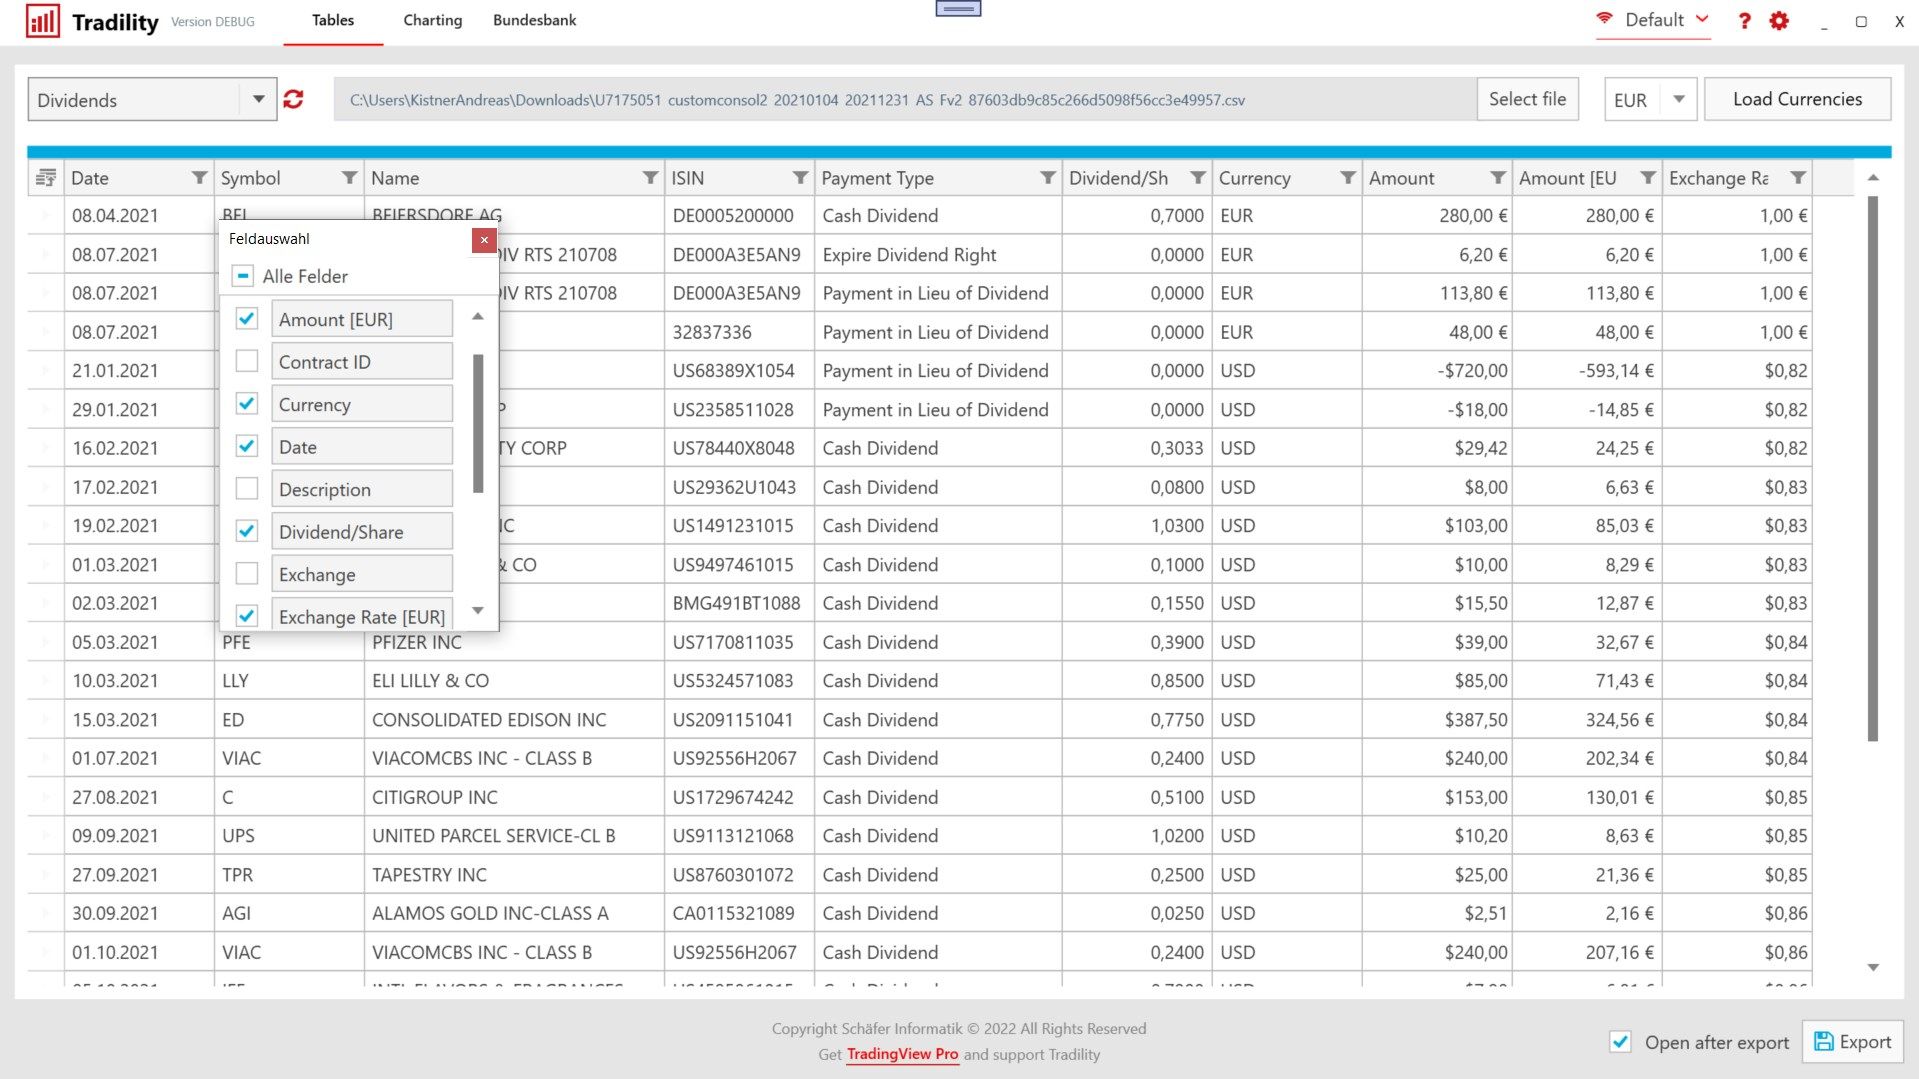 Check the dividends you actually received in tables - and select which columns you want to have displayed.